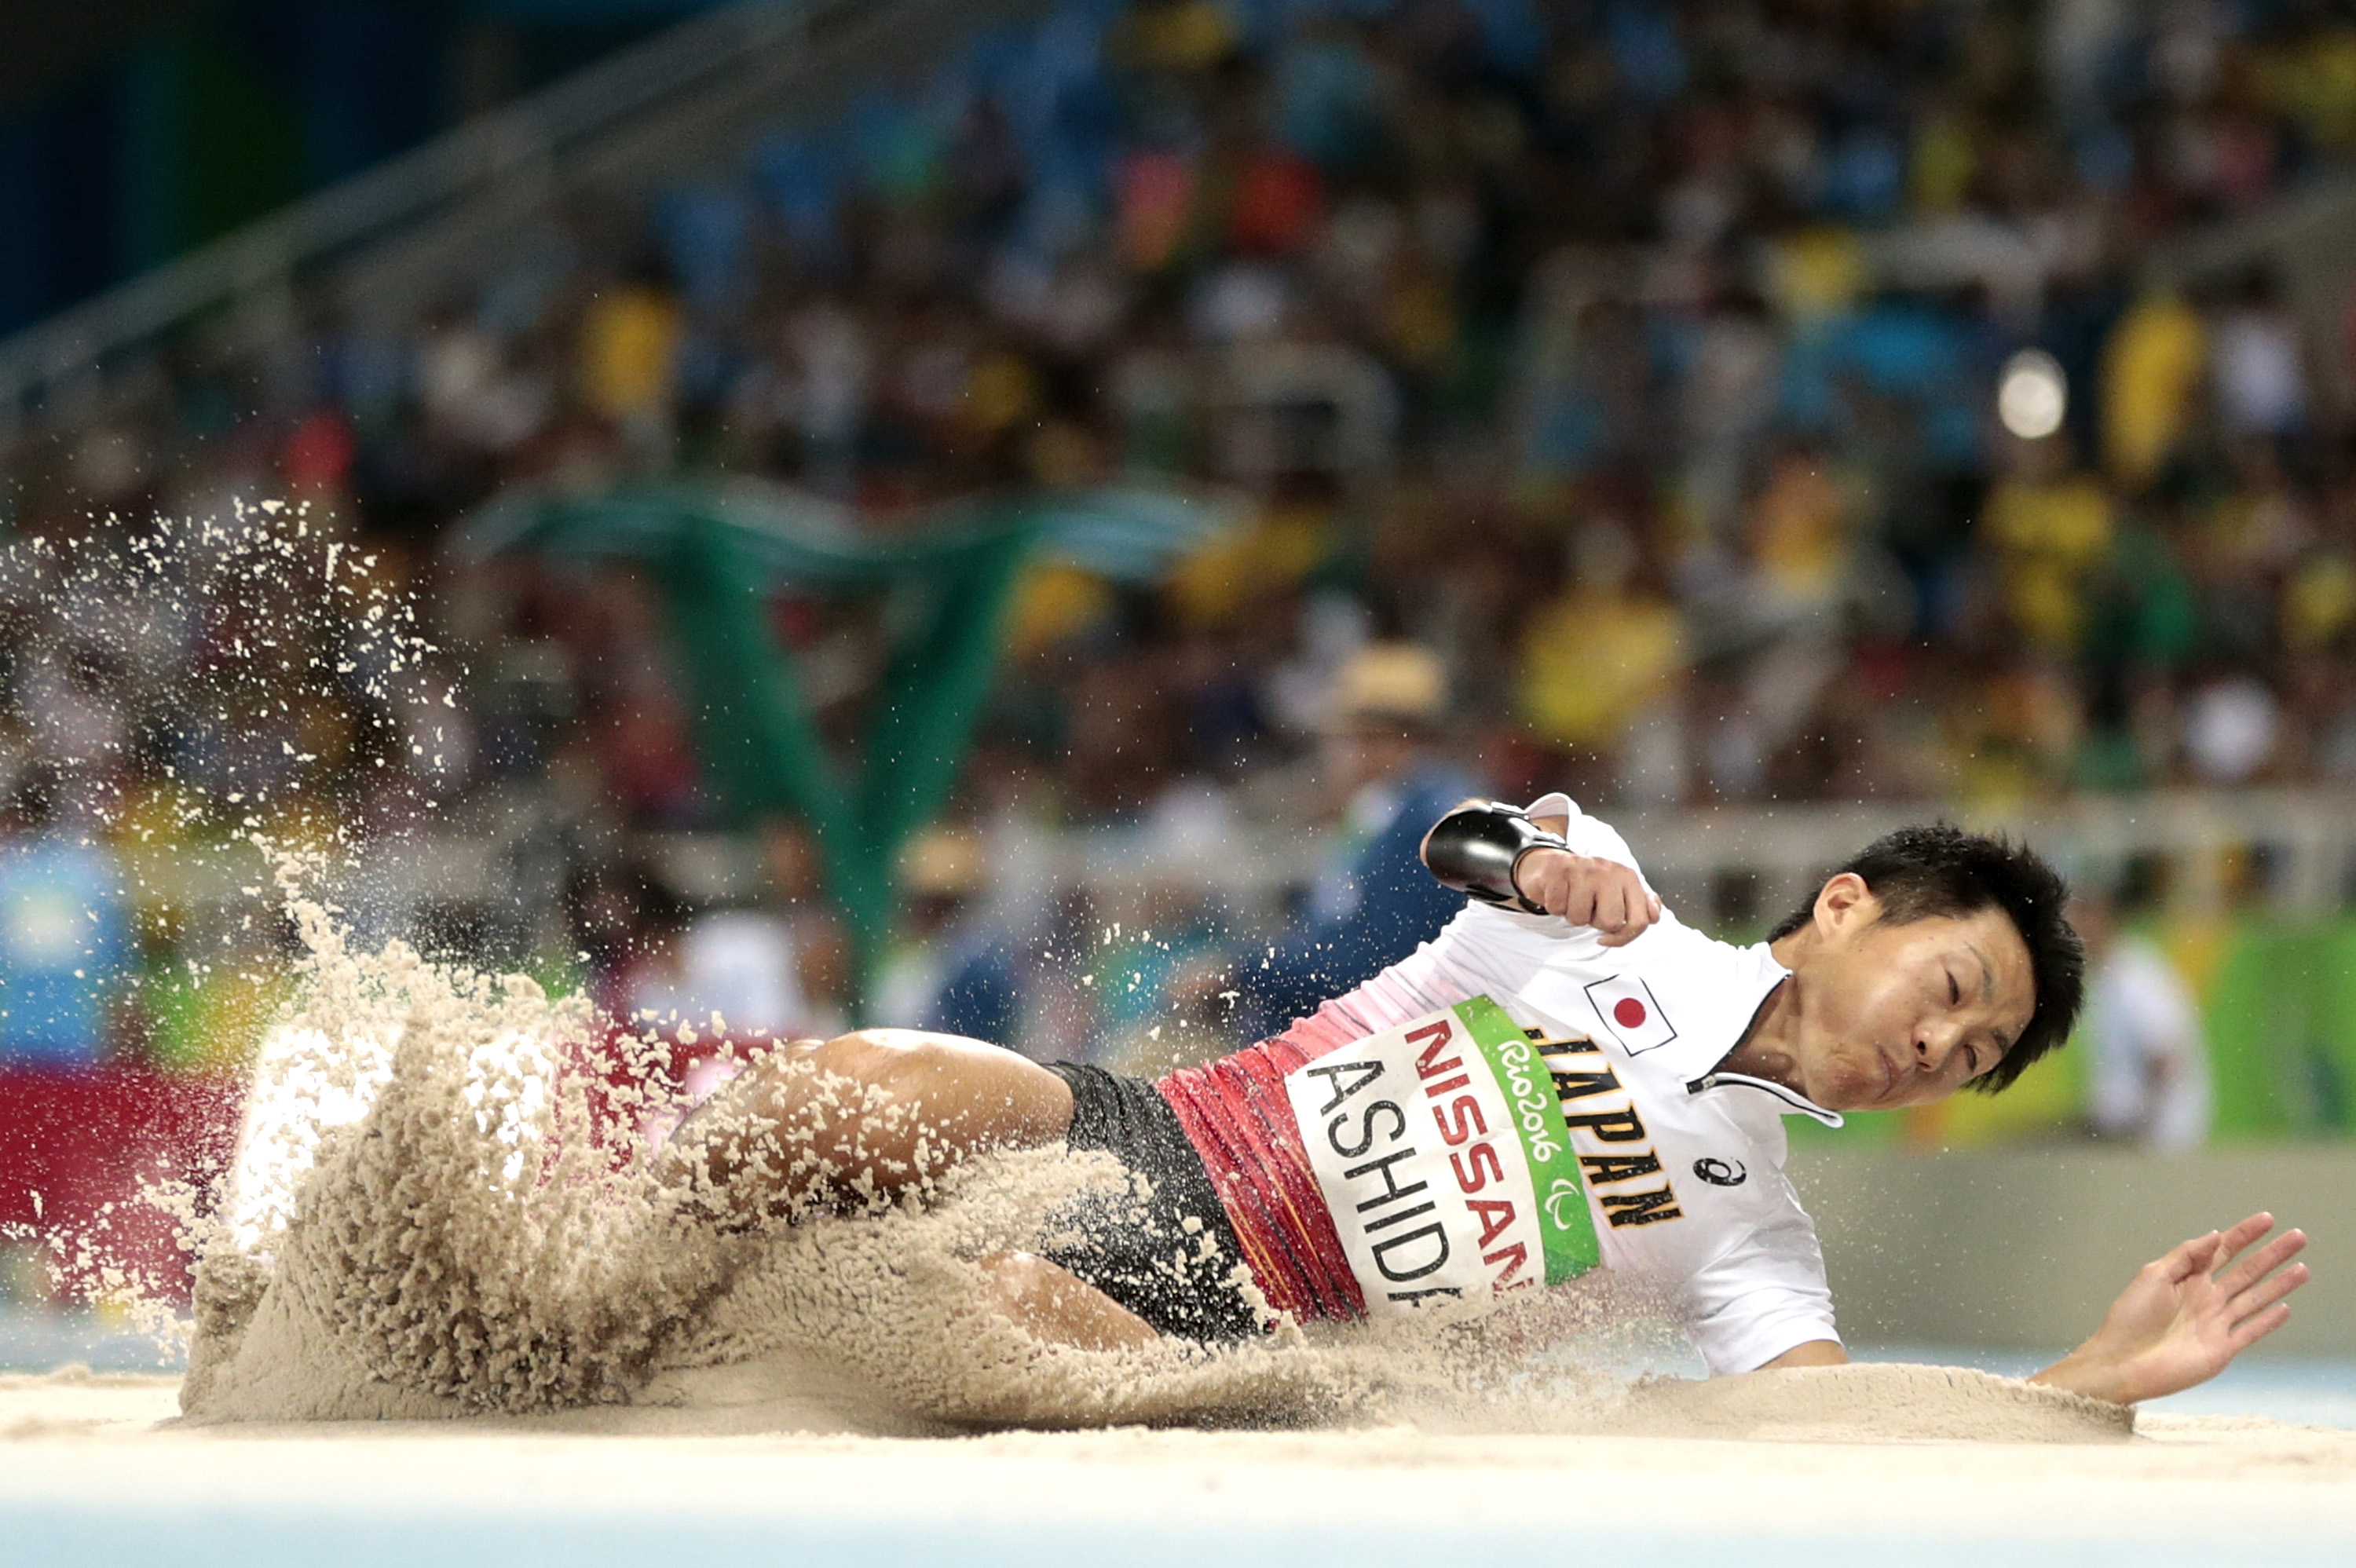 Japanese man completes long jump in sand